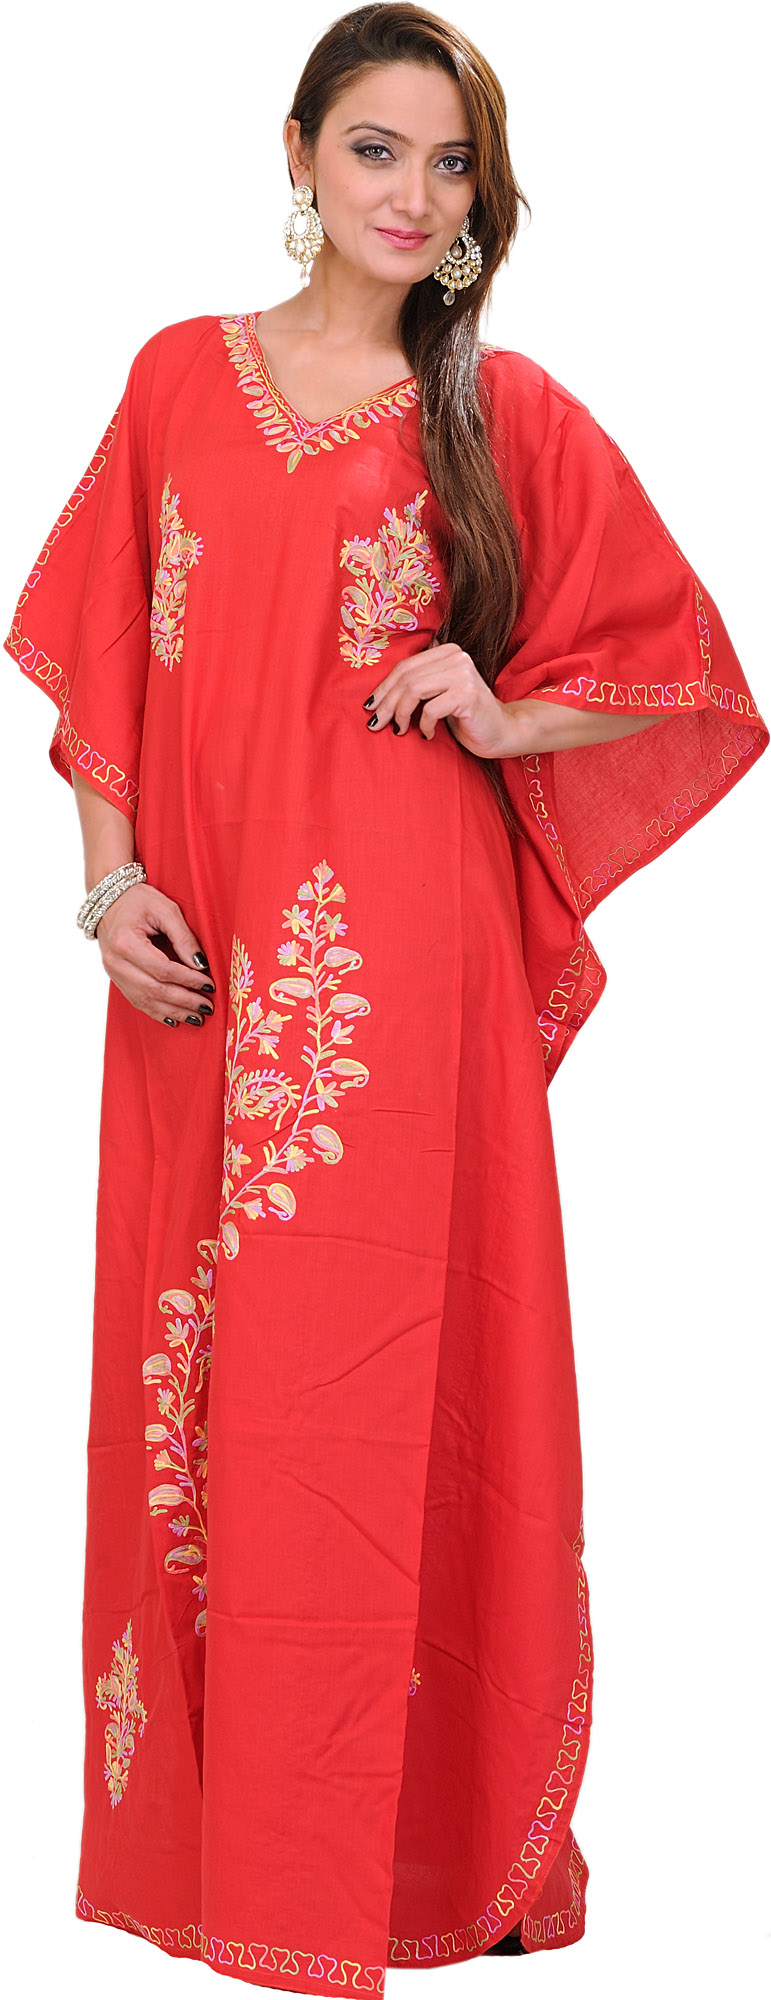 Tomato-Red Kaftan from Kashmir with Ari Embroidered Paisleys